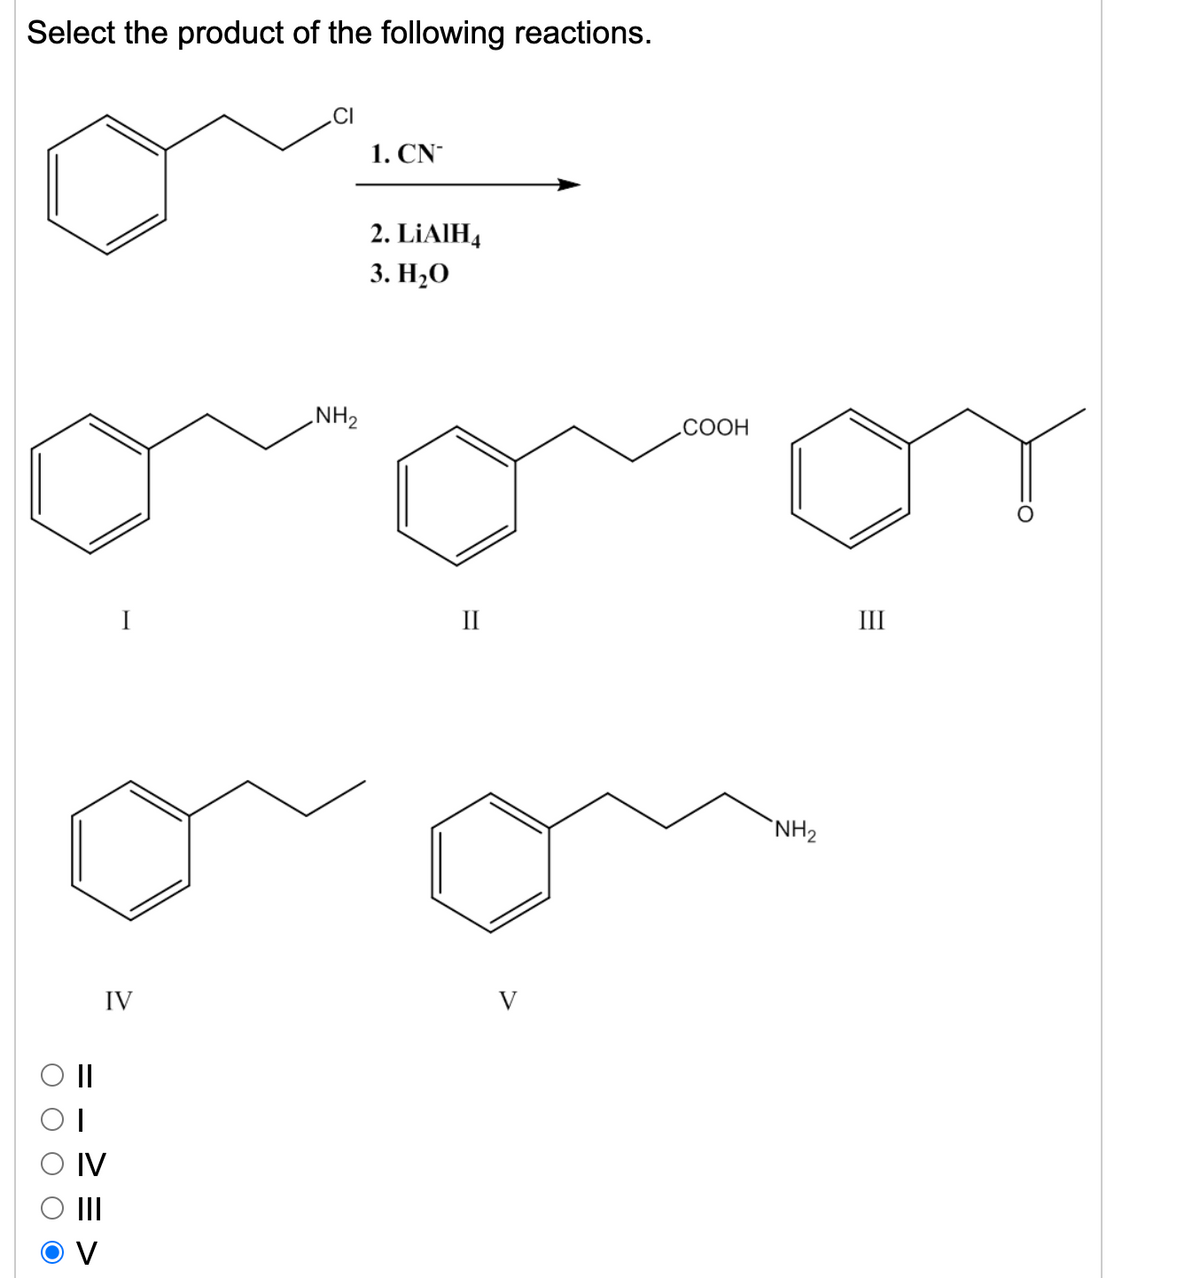 Select the product of the following reactions.
1. CN-
2. LİAIH4
3. Н,О
NH2
СООН
I
II
III
`NH2
IV
IV
O O O
